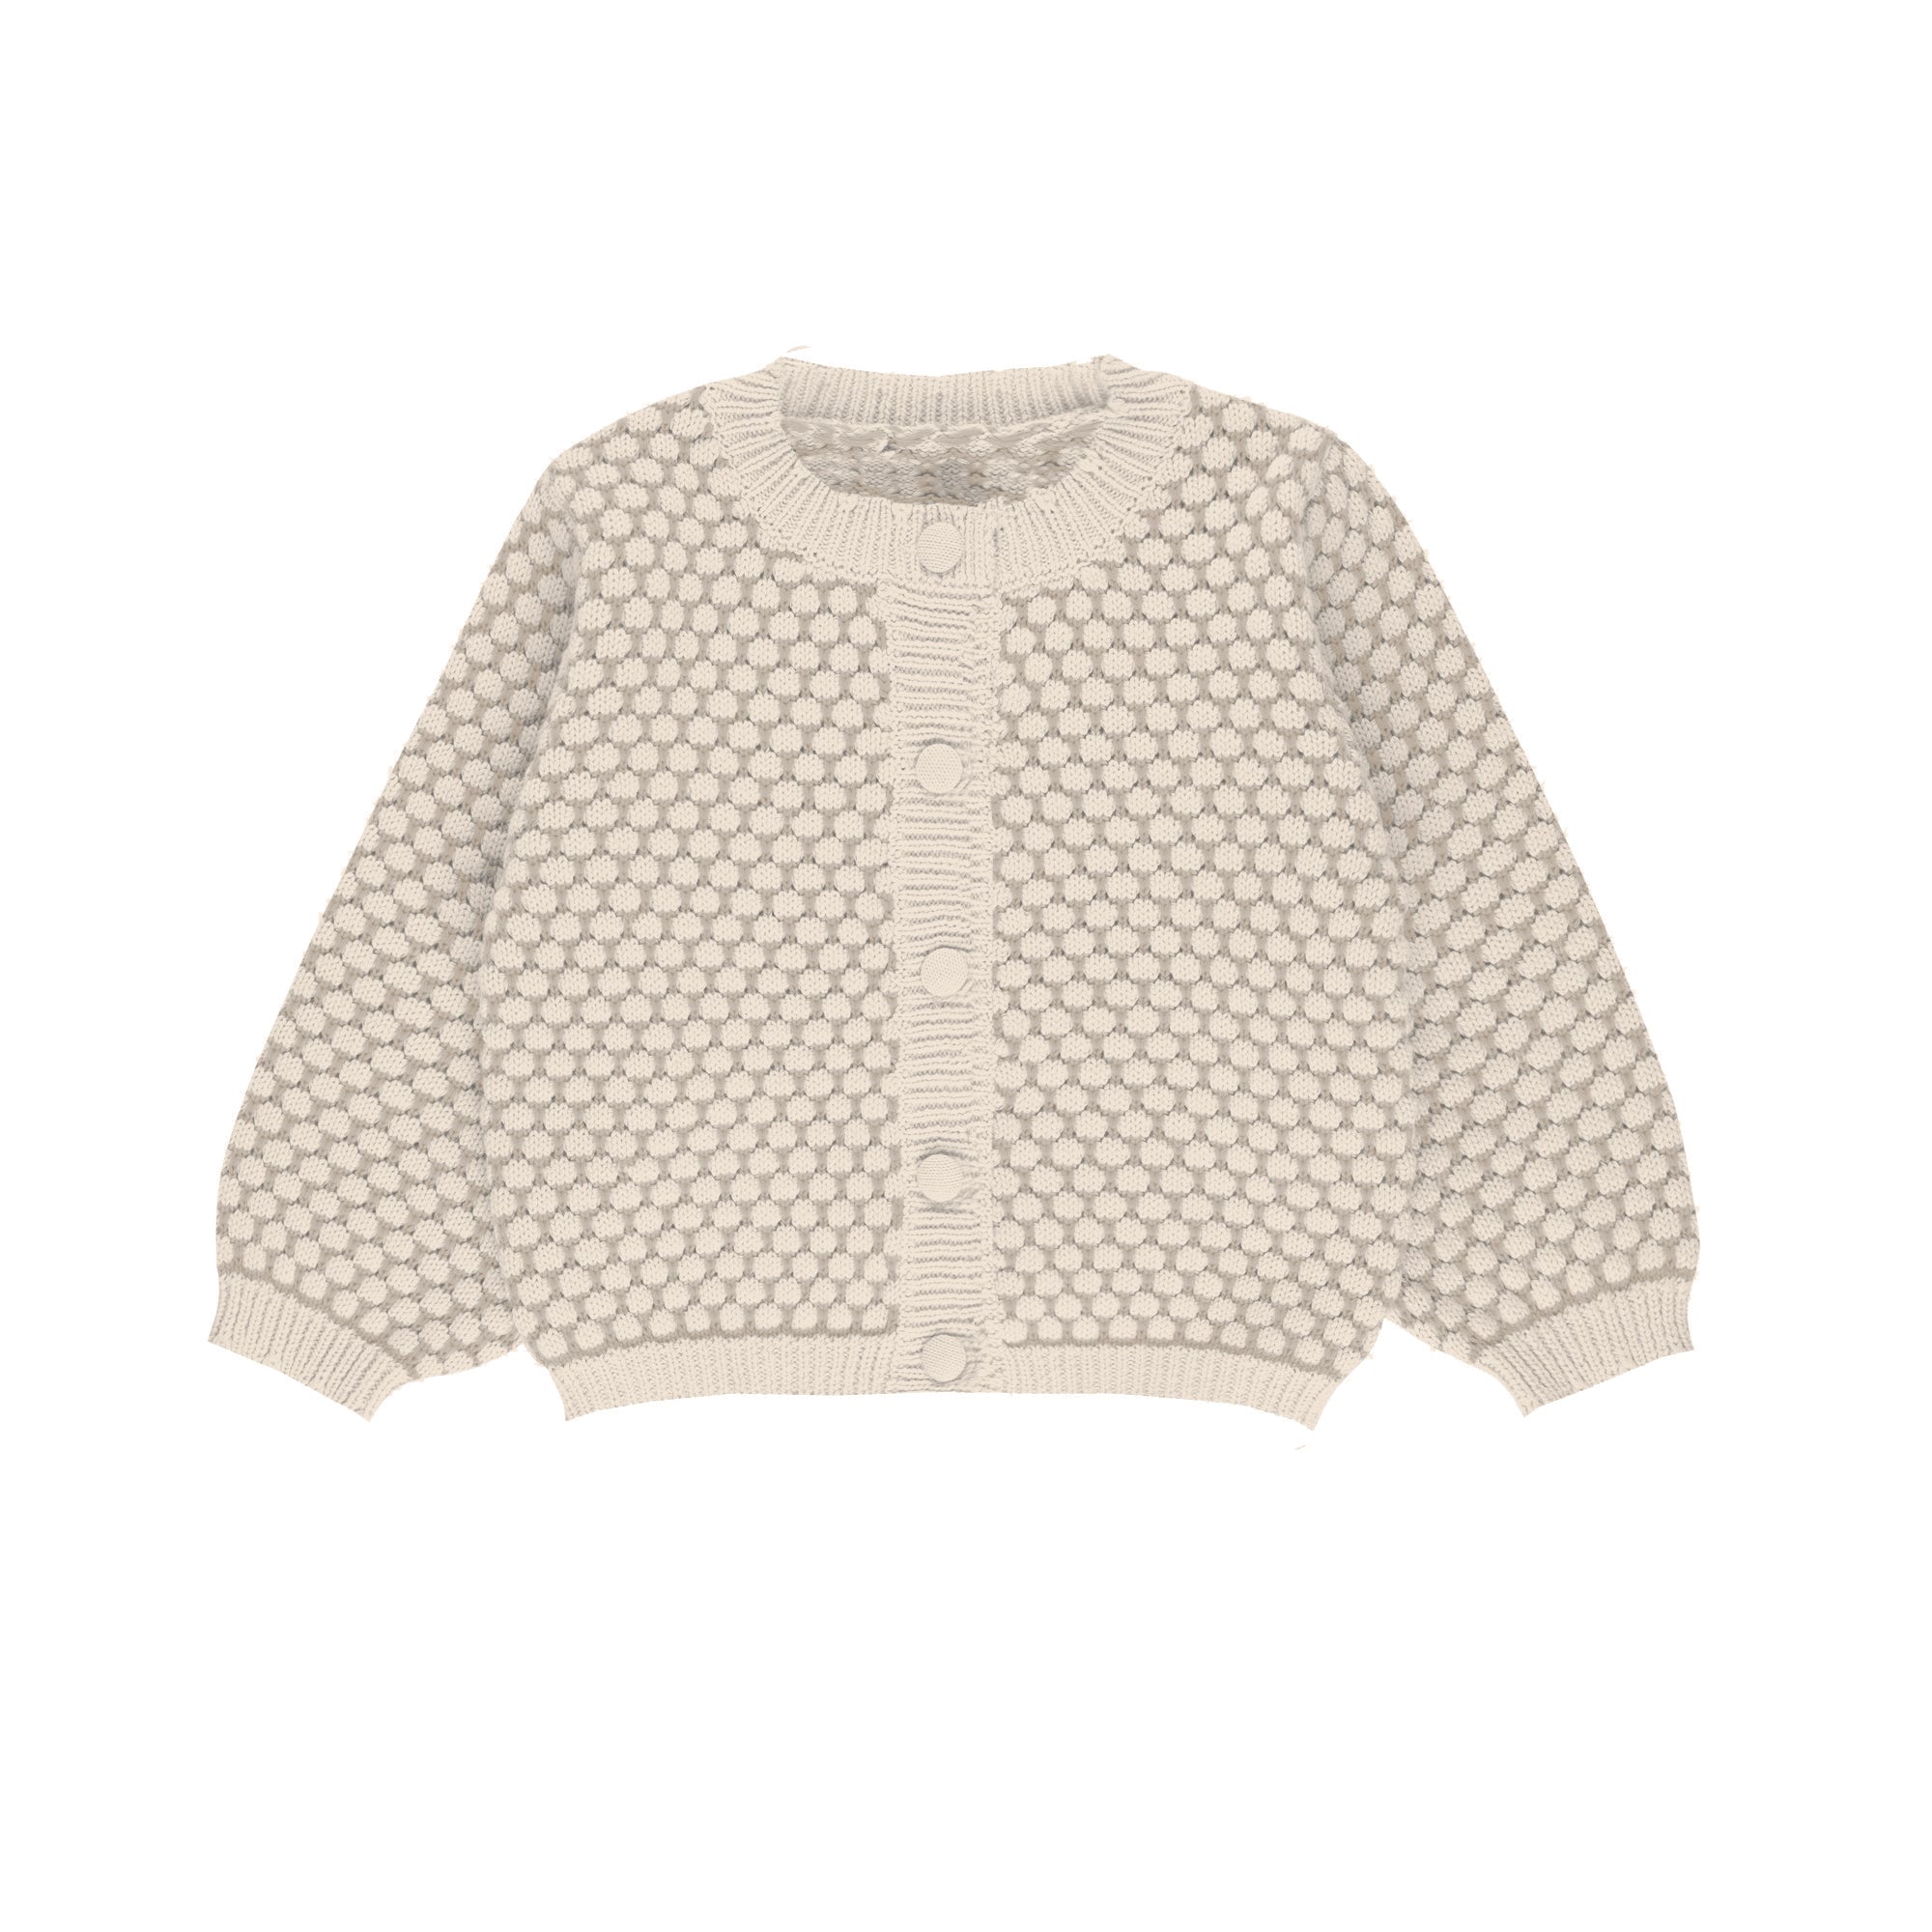 Elys & Co Beige Popcorn Knit Collection Cardigan | Buttons Bebe